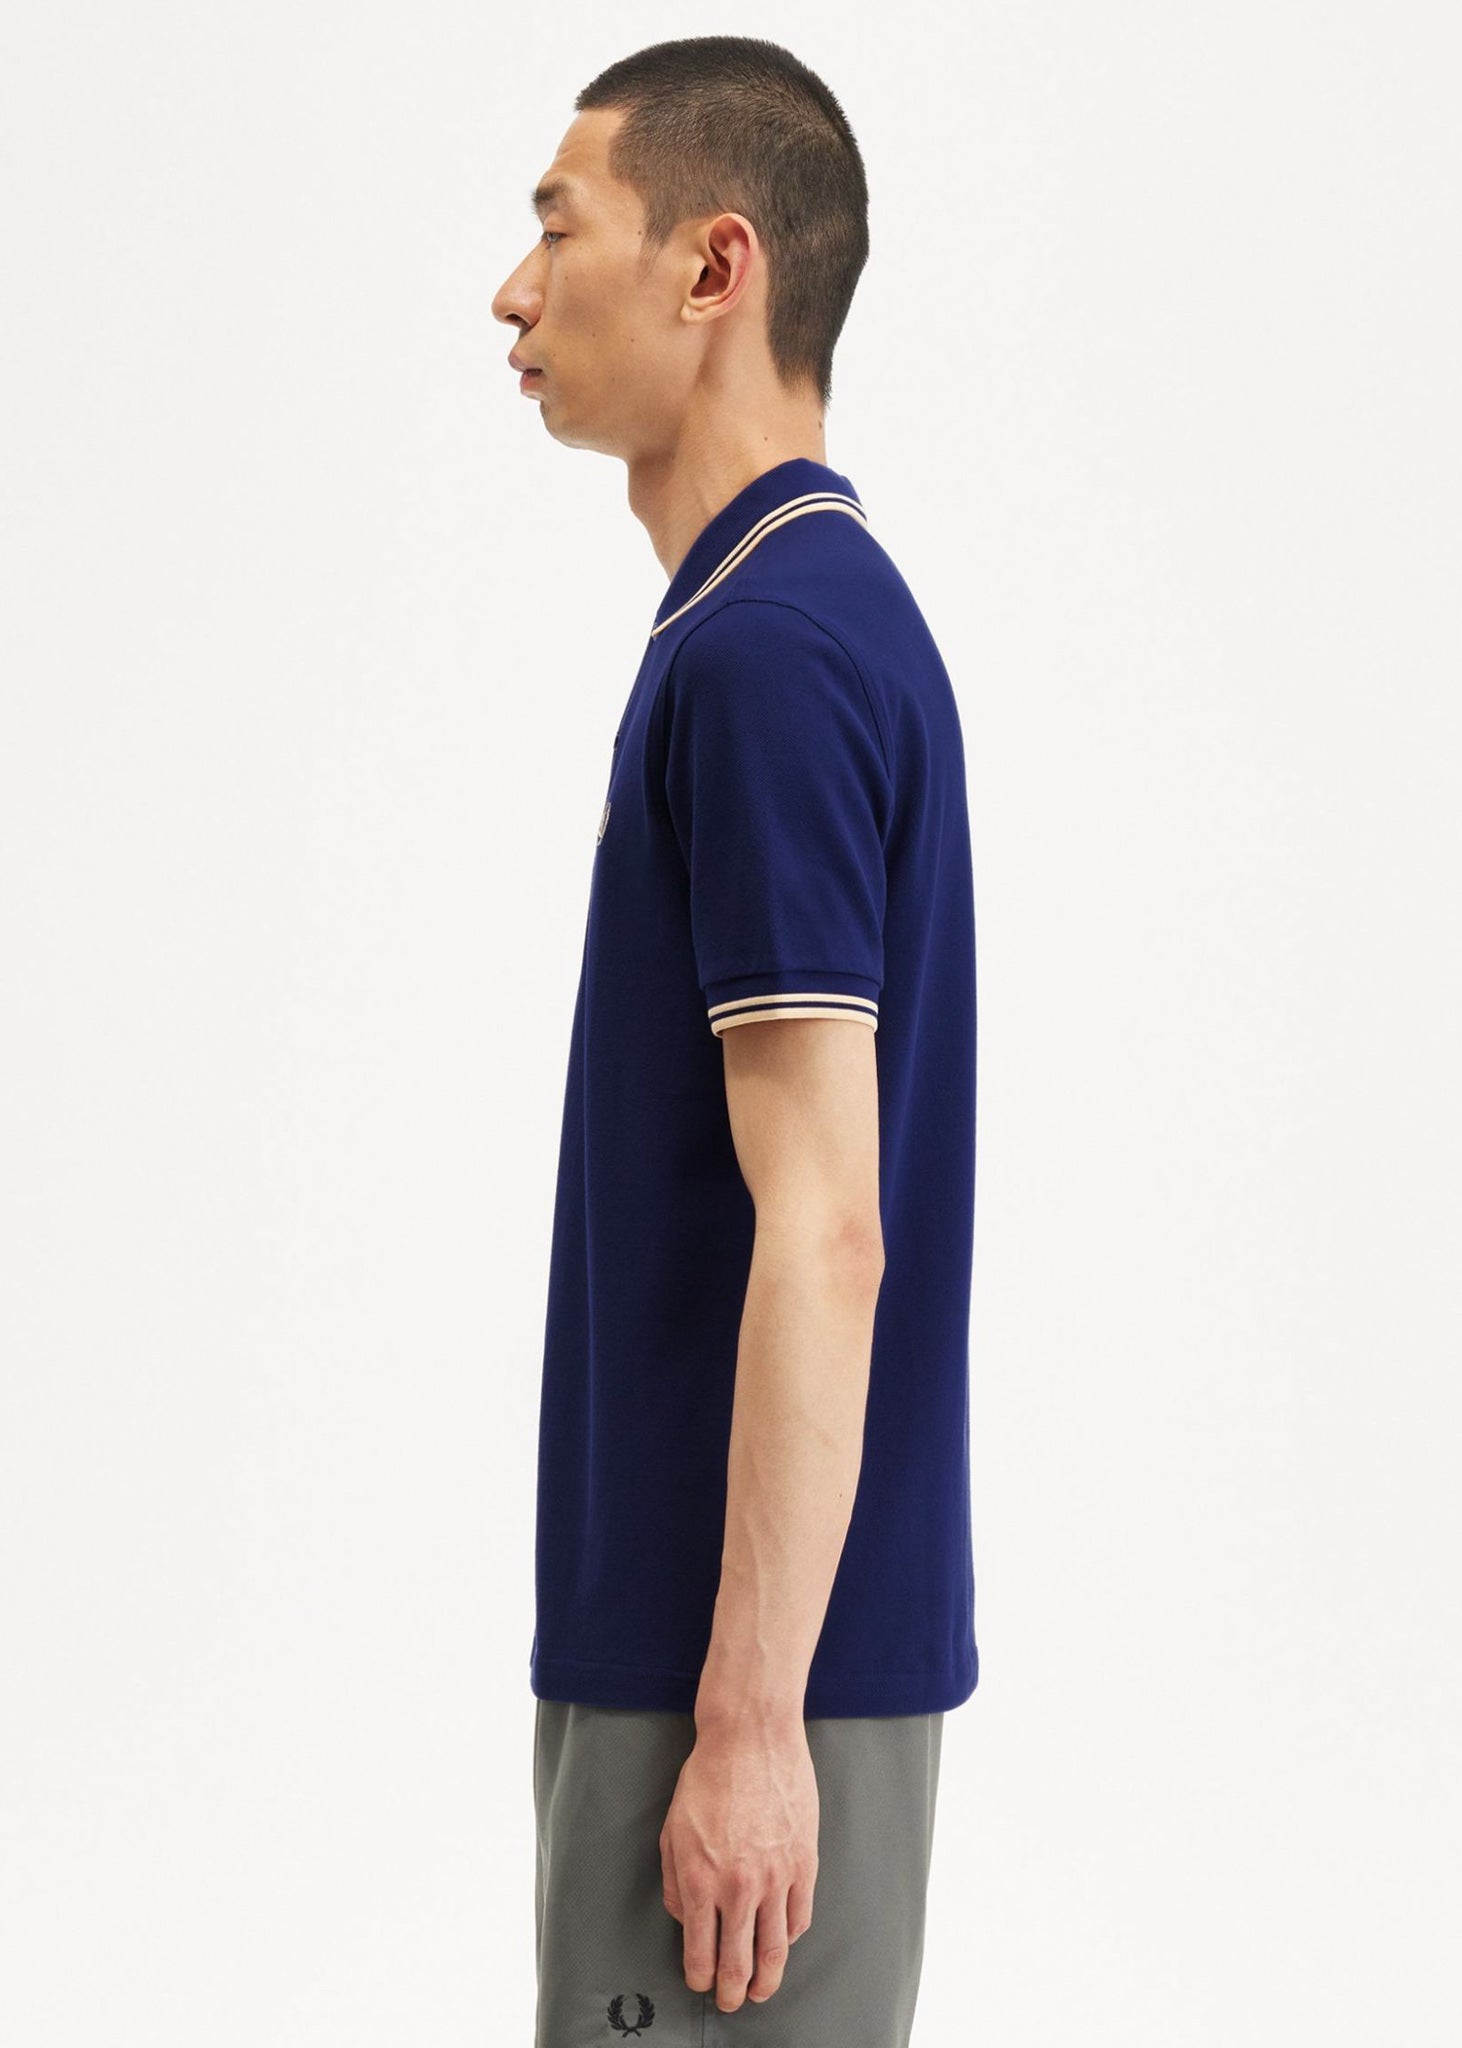 Fred Perry Polo's  Twin tipped Fred Perry shirt - french navy ice cream 